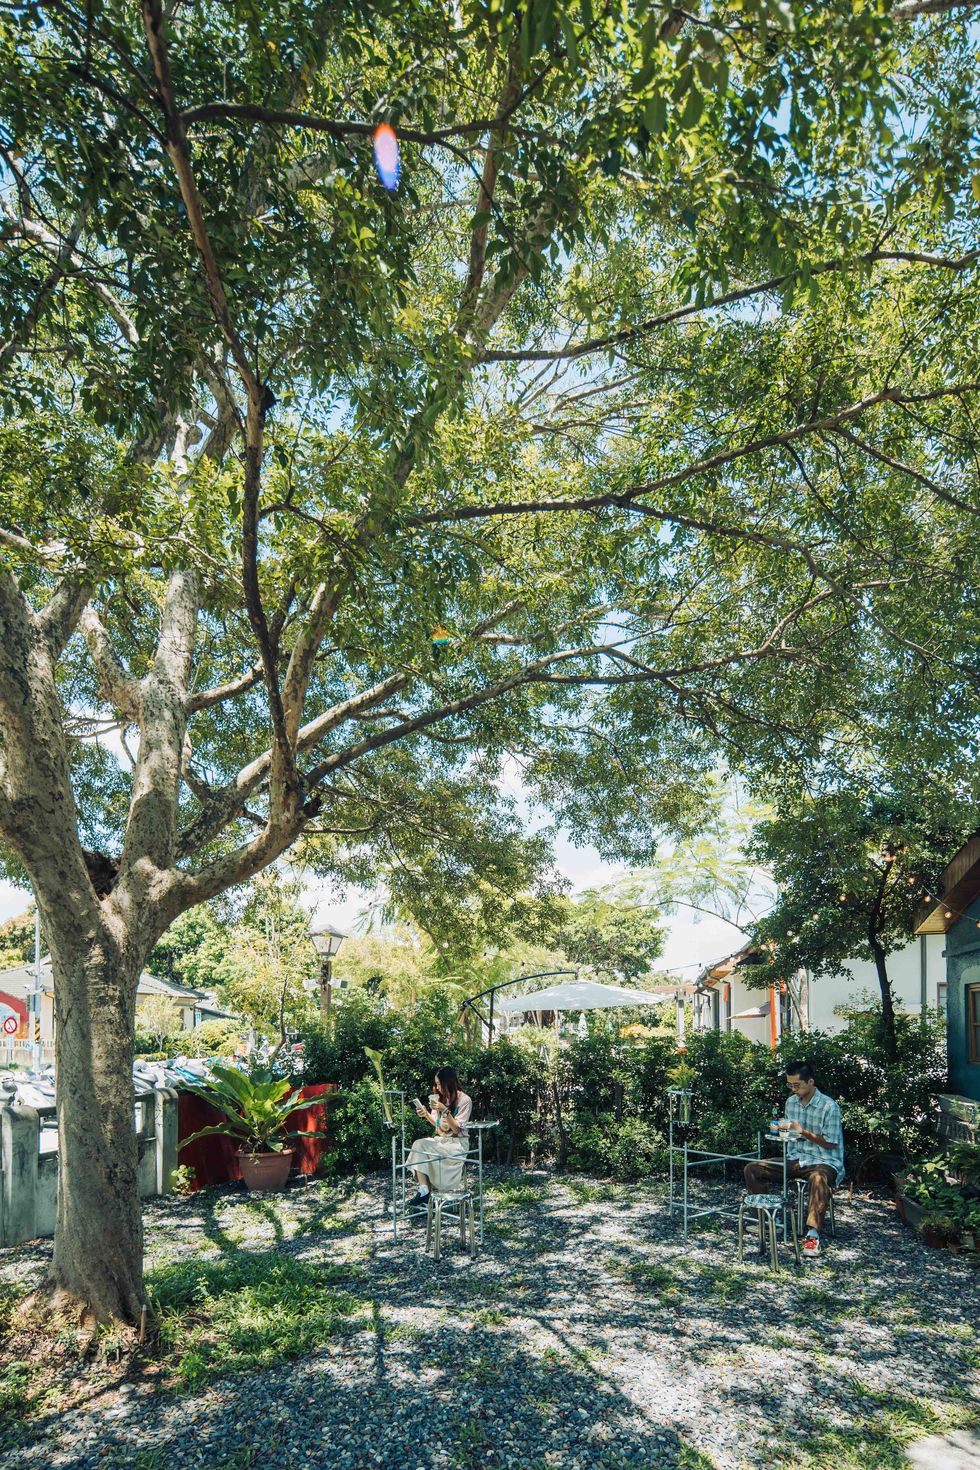 a couple of people sitting under a tree in a yard